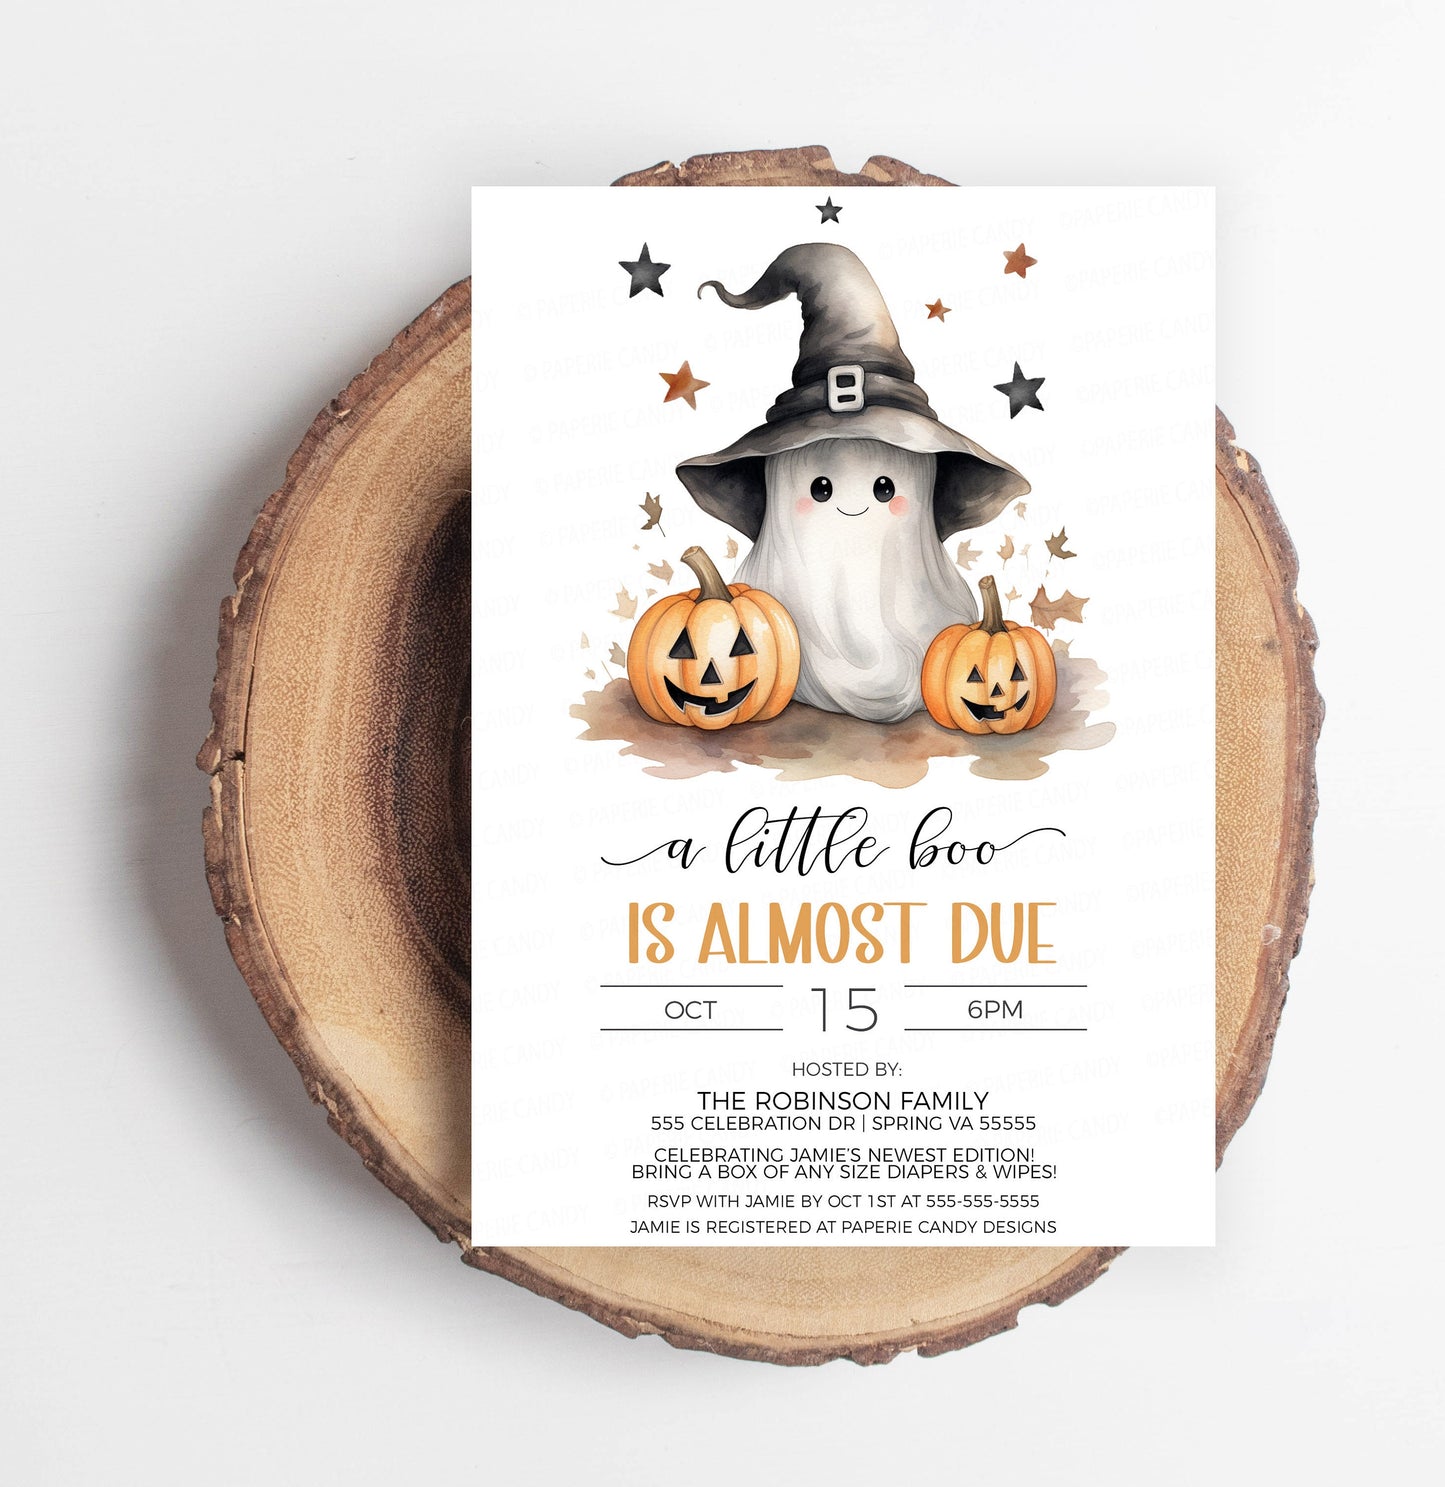 Halloween Baby Shower Invitation, A Little Boo Is Almost Due Invite, Couples Baby Shower, Boy Girl Shower, Pumpkin Ghost, Editable Printable